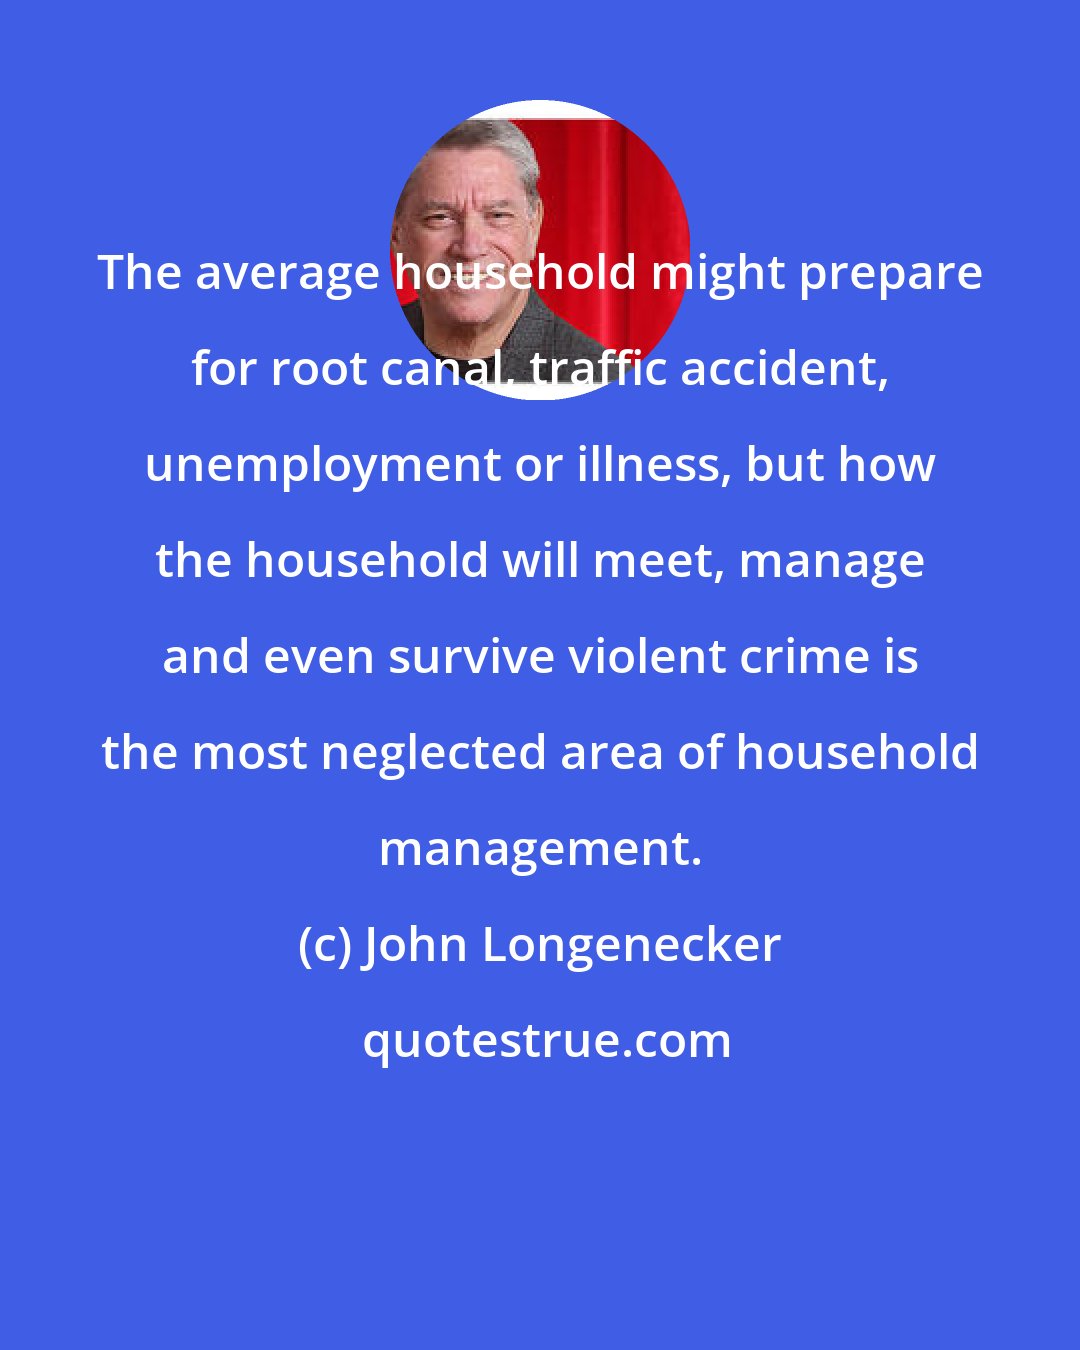 John Longenecker: The average household might prepare for root canal, traffic accident, unemployment or illness, but how the household will meet, manage and even survive violent crime is the most neglected area of household management.